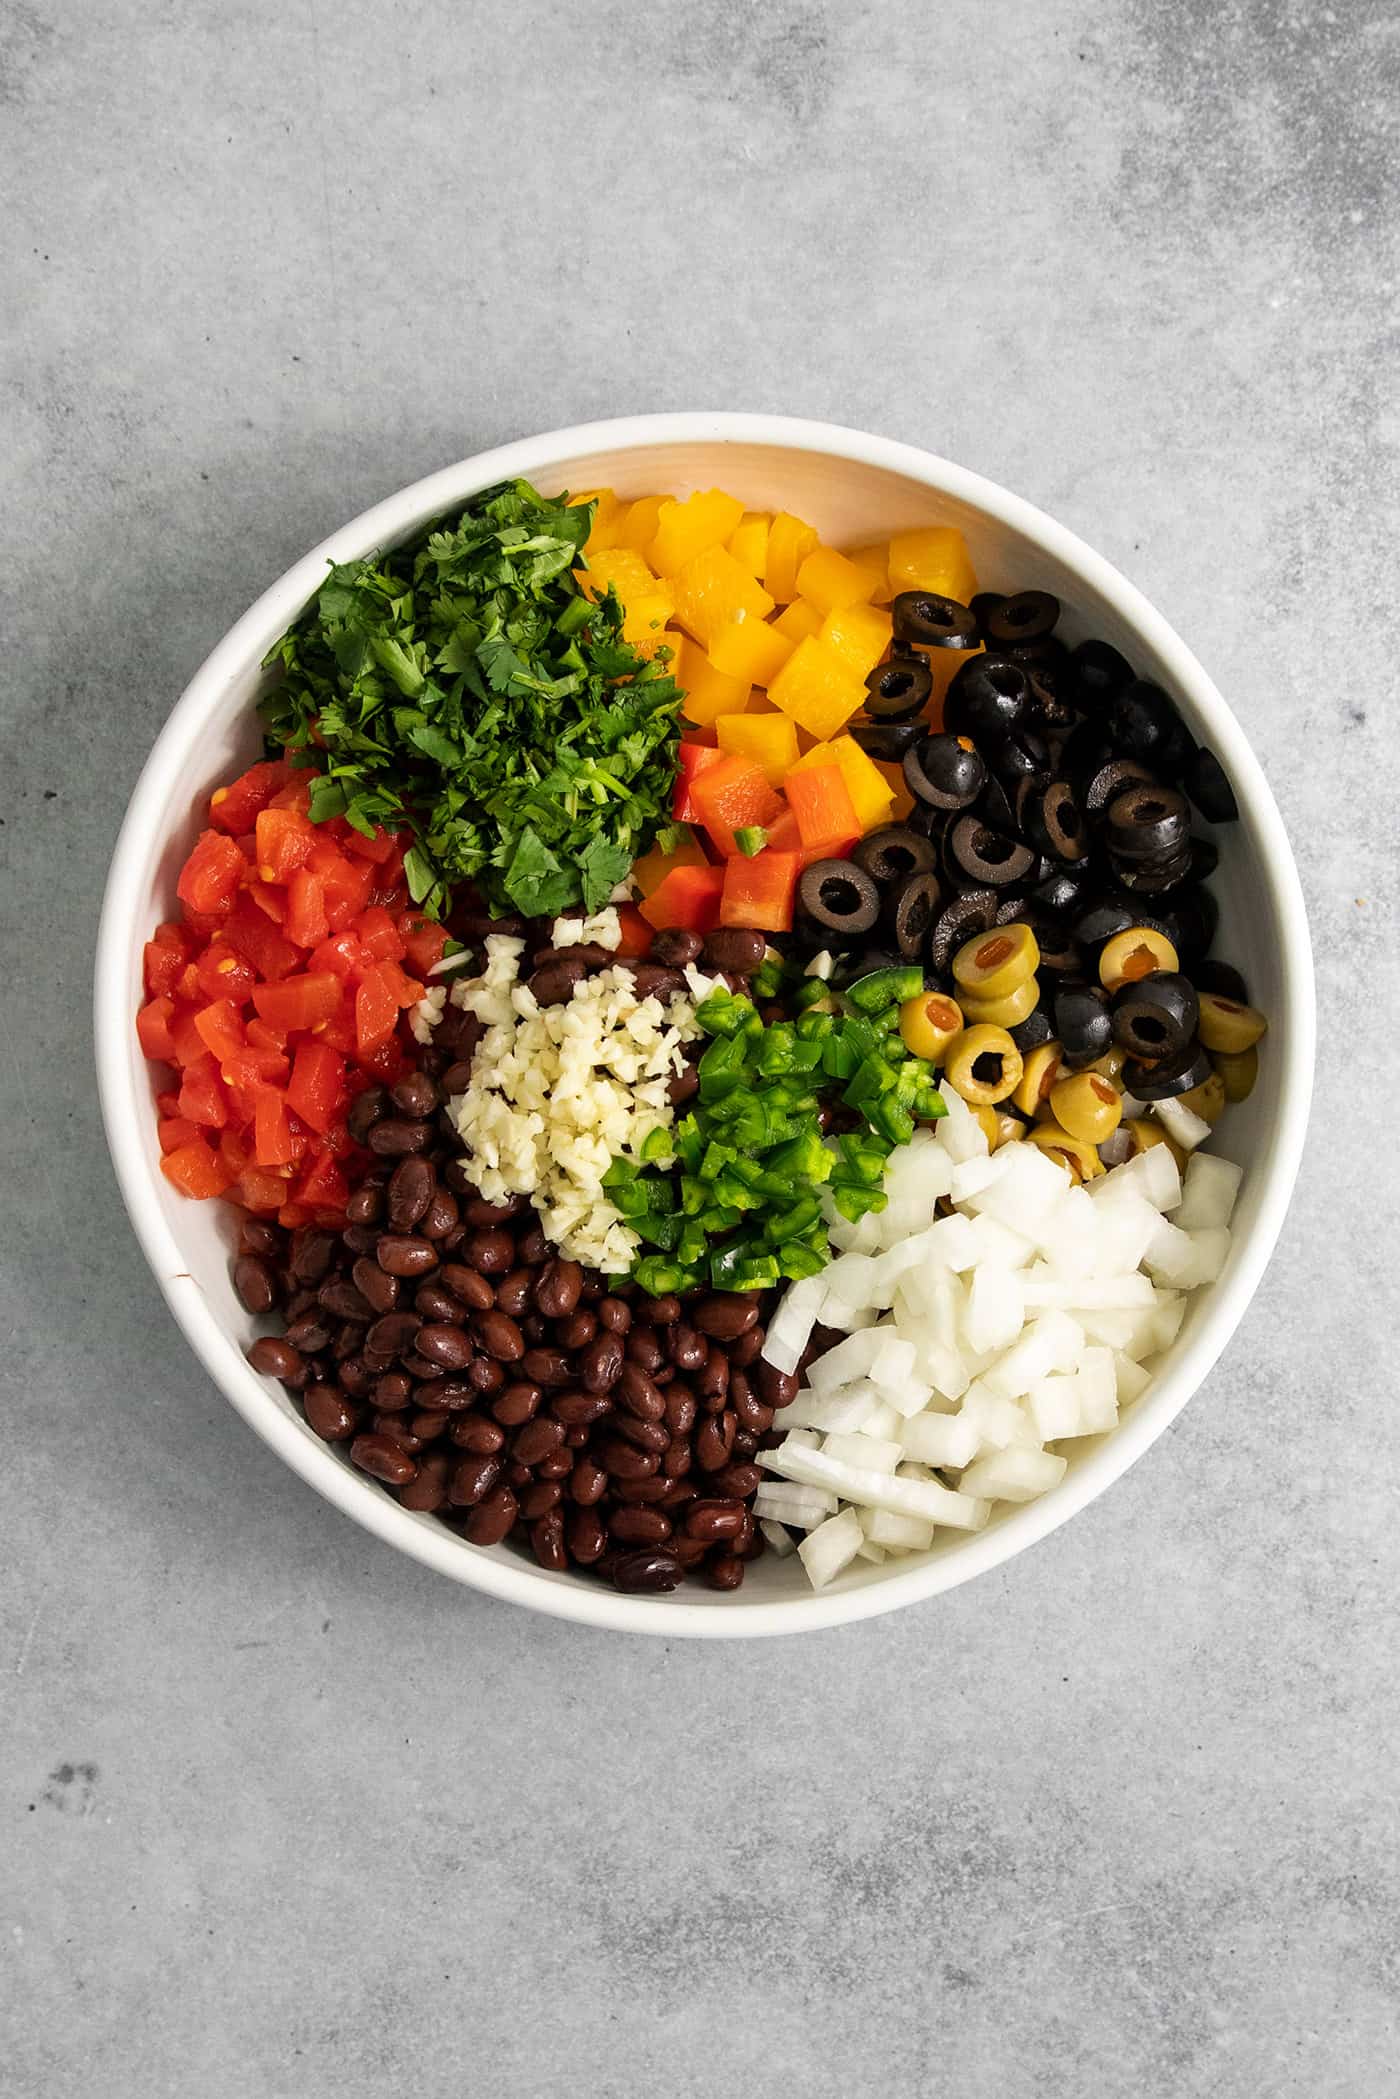 Black bean salsa components are added to a bowl to be mixed together.